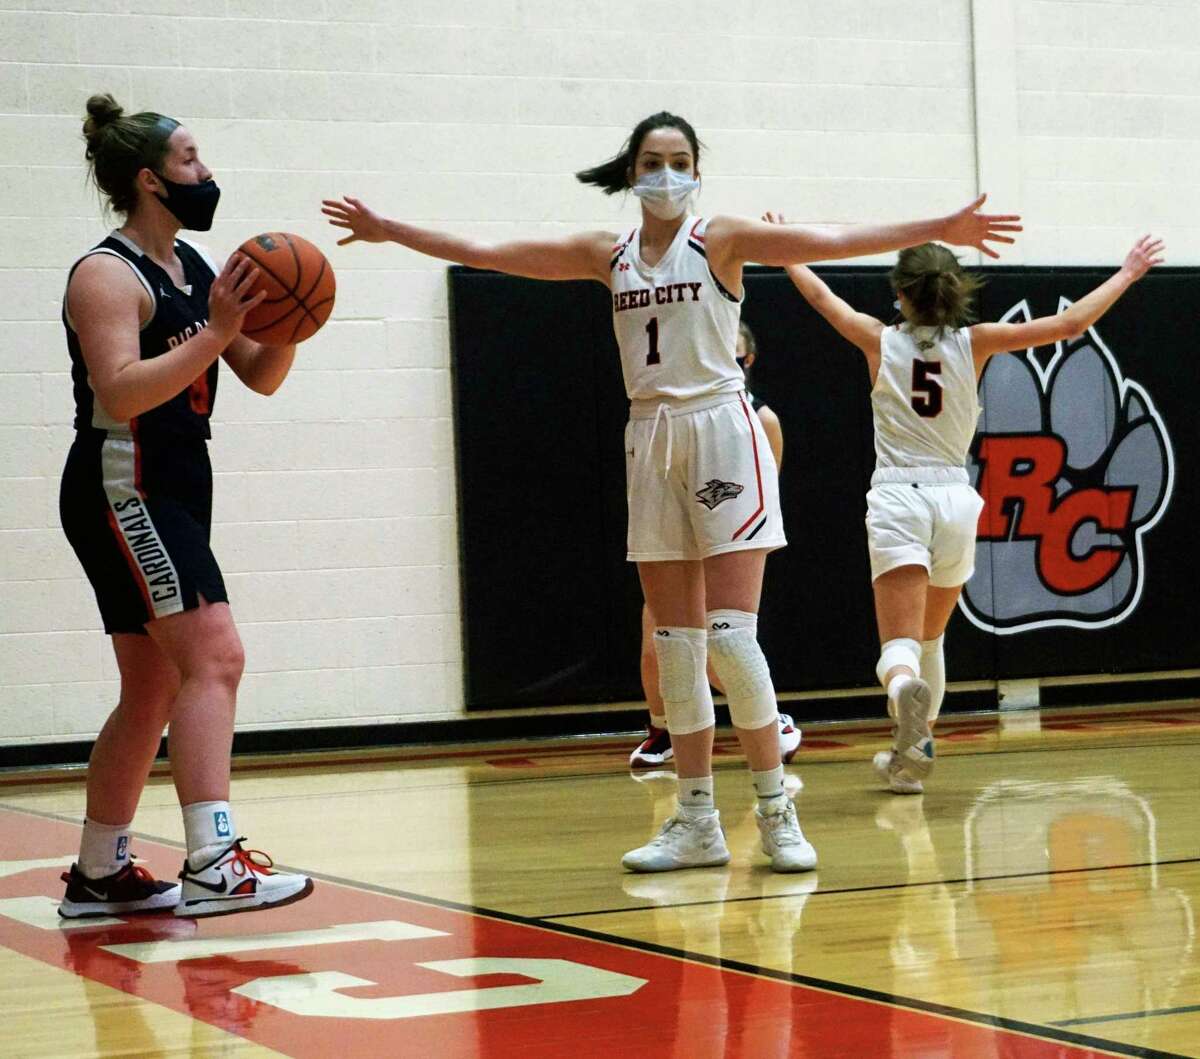 Big Rapids sophomore Rylie Haist (left) looks to inbound the ball during a game on Tuesday night as Reed City's (name) gets ready to defend. (Pioneer photo/Joe Judd)